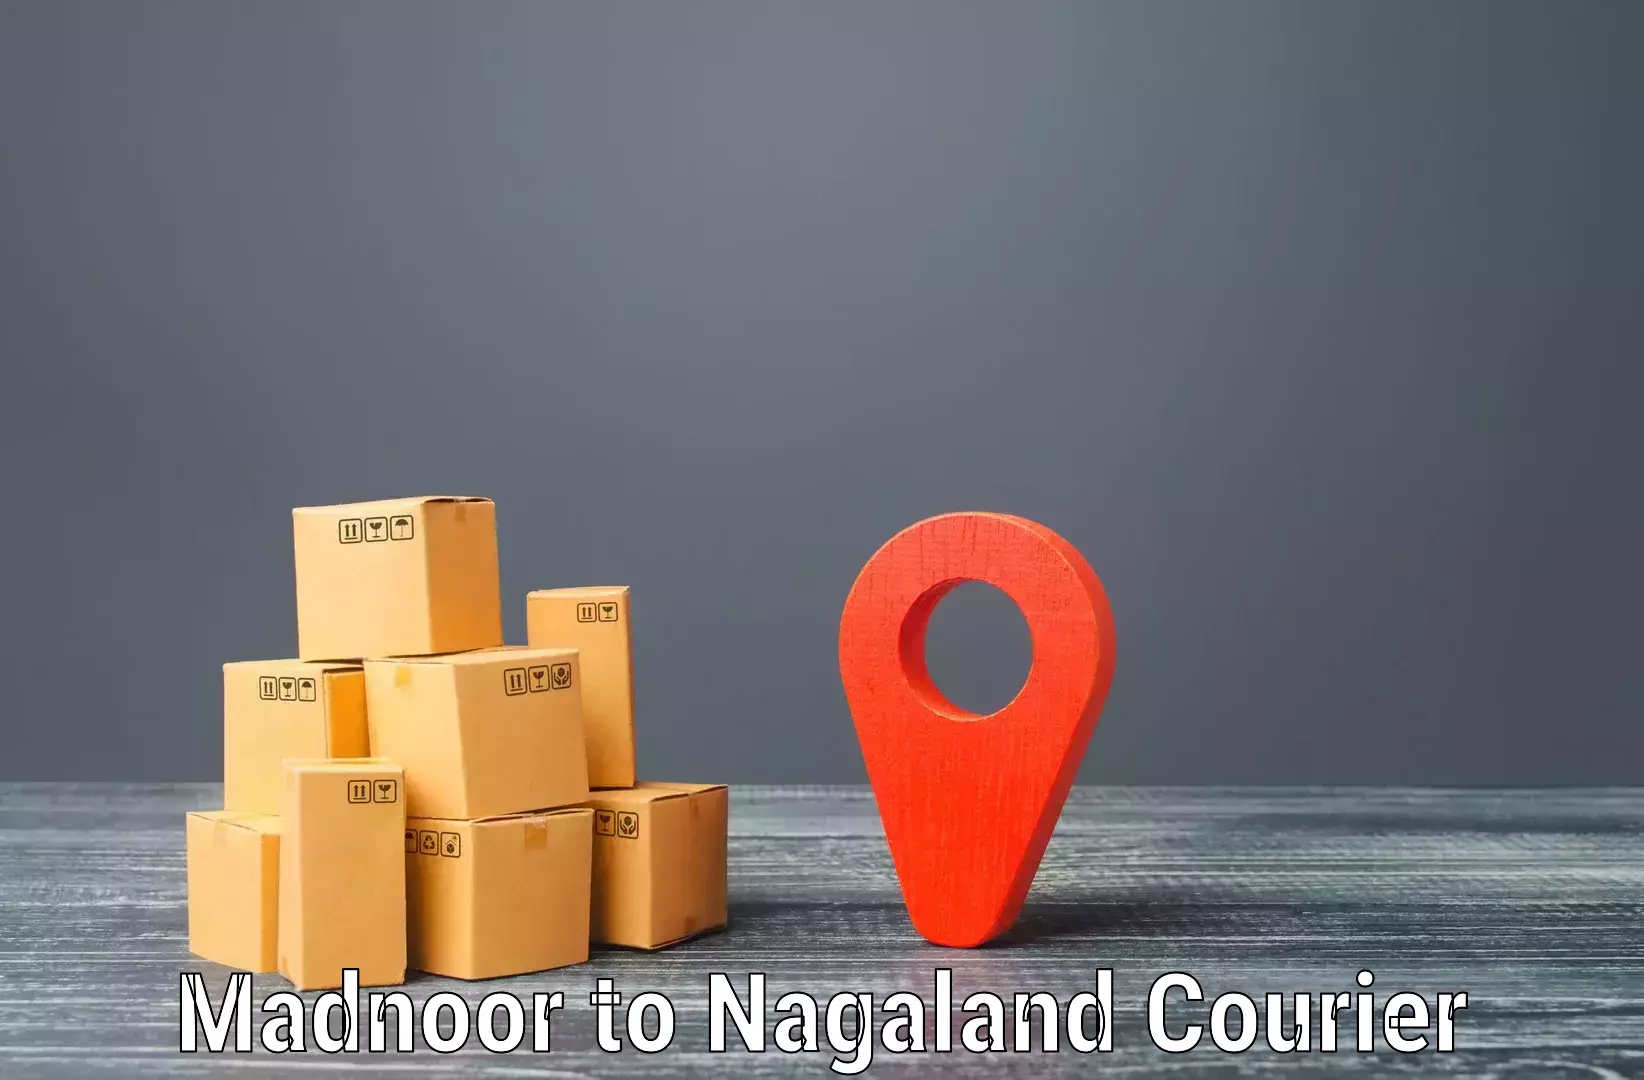 Advanced shipping services Madnoor to Nagaland